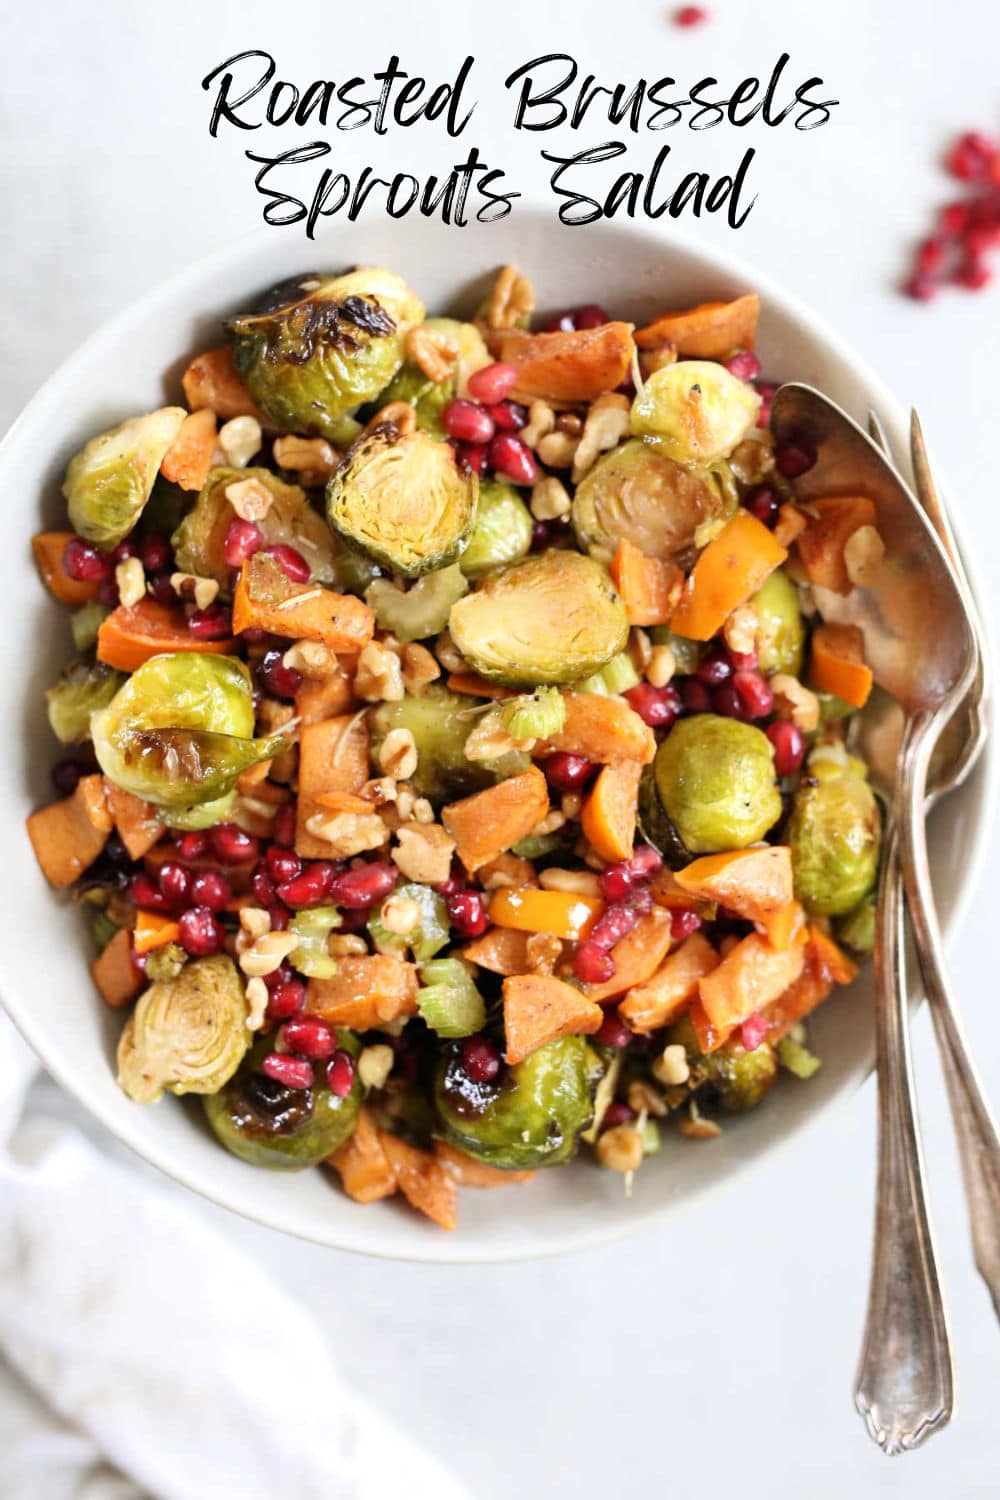 roasted brussels sprouts salad recipe